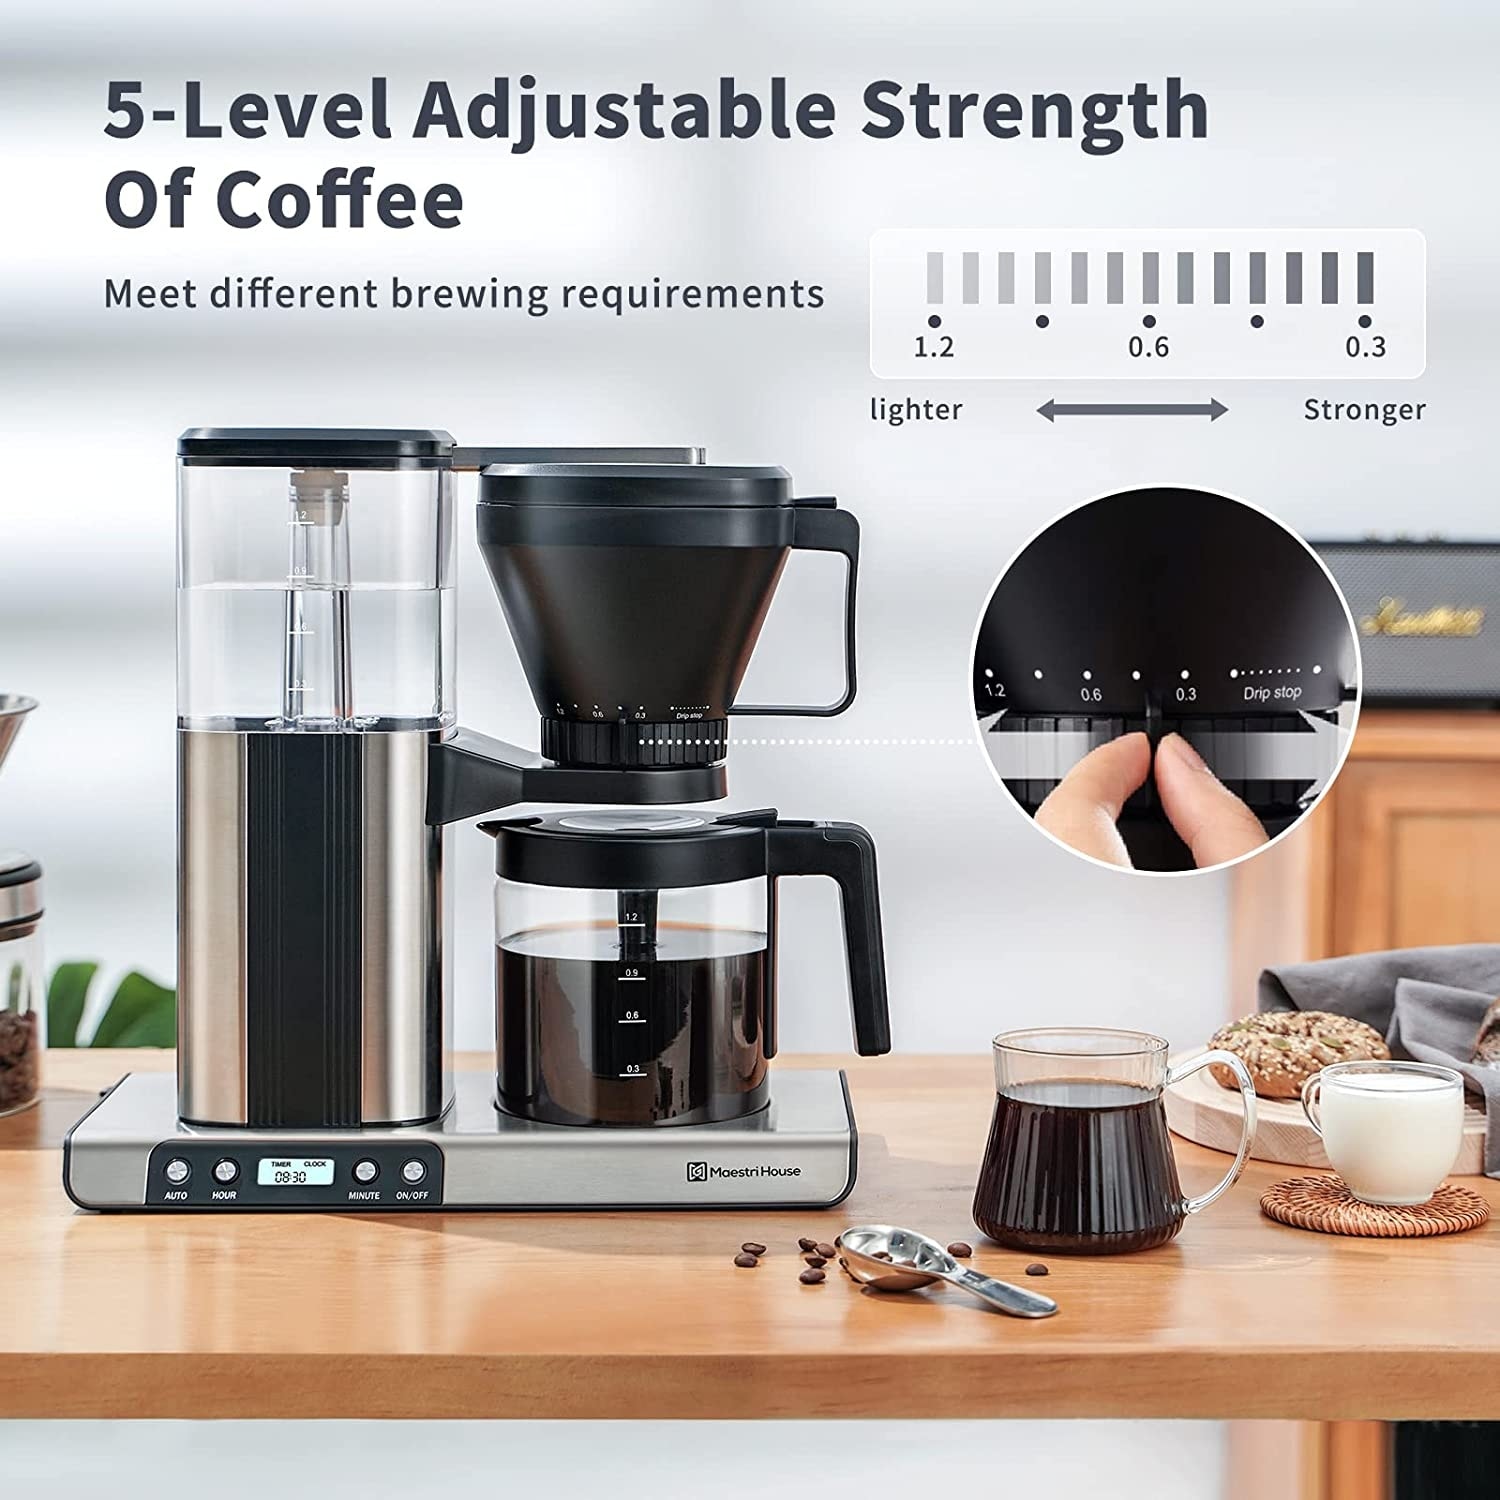 https://ak1.ostkcdn.com/images/products/is/images/direct/a5e0edcd8af5c6af20d9690b264bb411018ba0d0/House-Coffee-Maker%2C-8-Cup-Drip-Coffee-Machine-with-Stainless-Steel%2C-One-Touch-Brewing-and-Adjustable-Strength.jpg